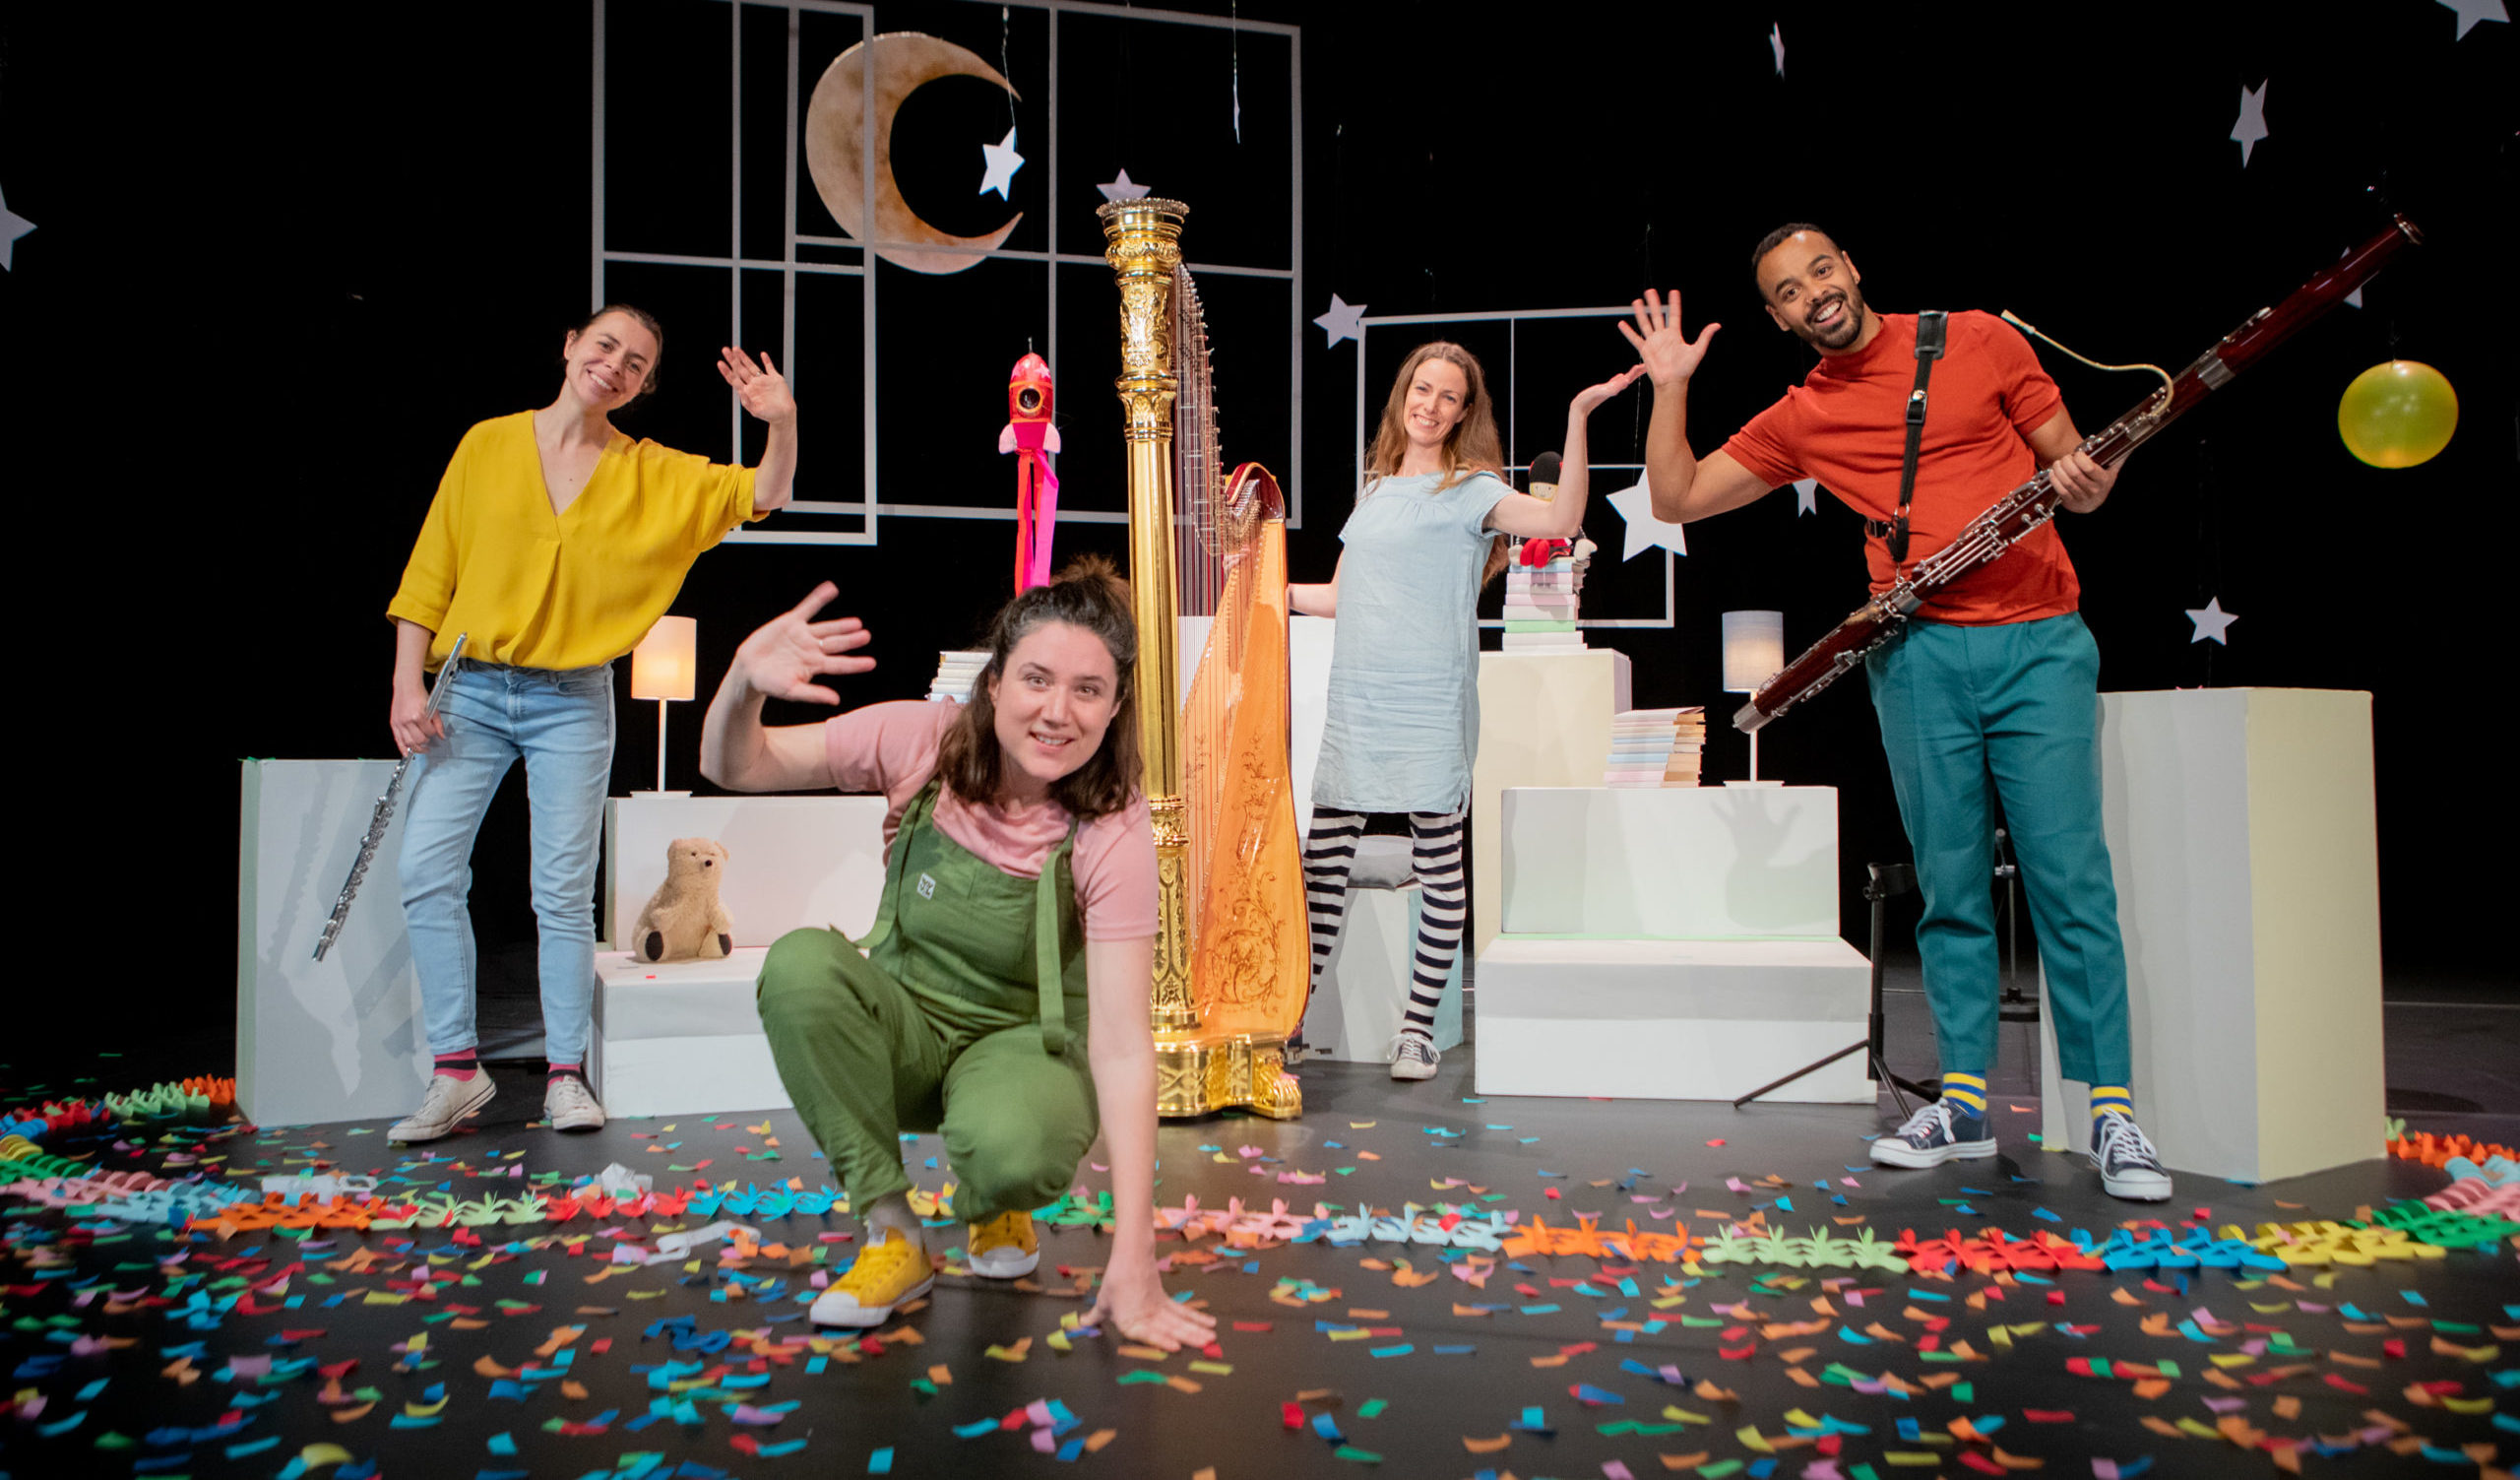 Four adults wave at the camera, surrounded by children's props and colourful scenery